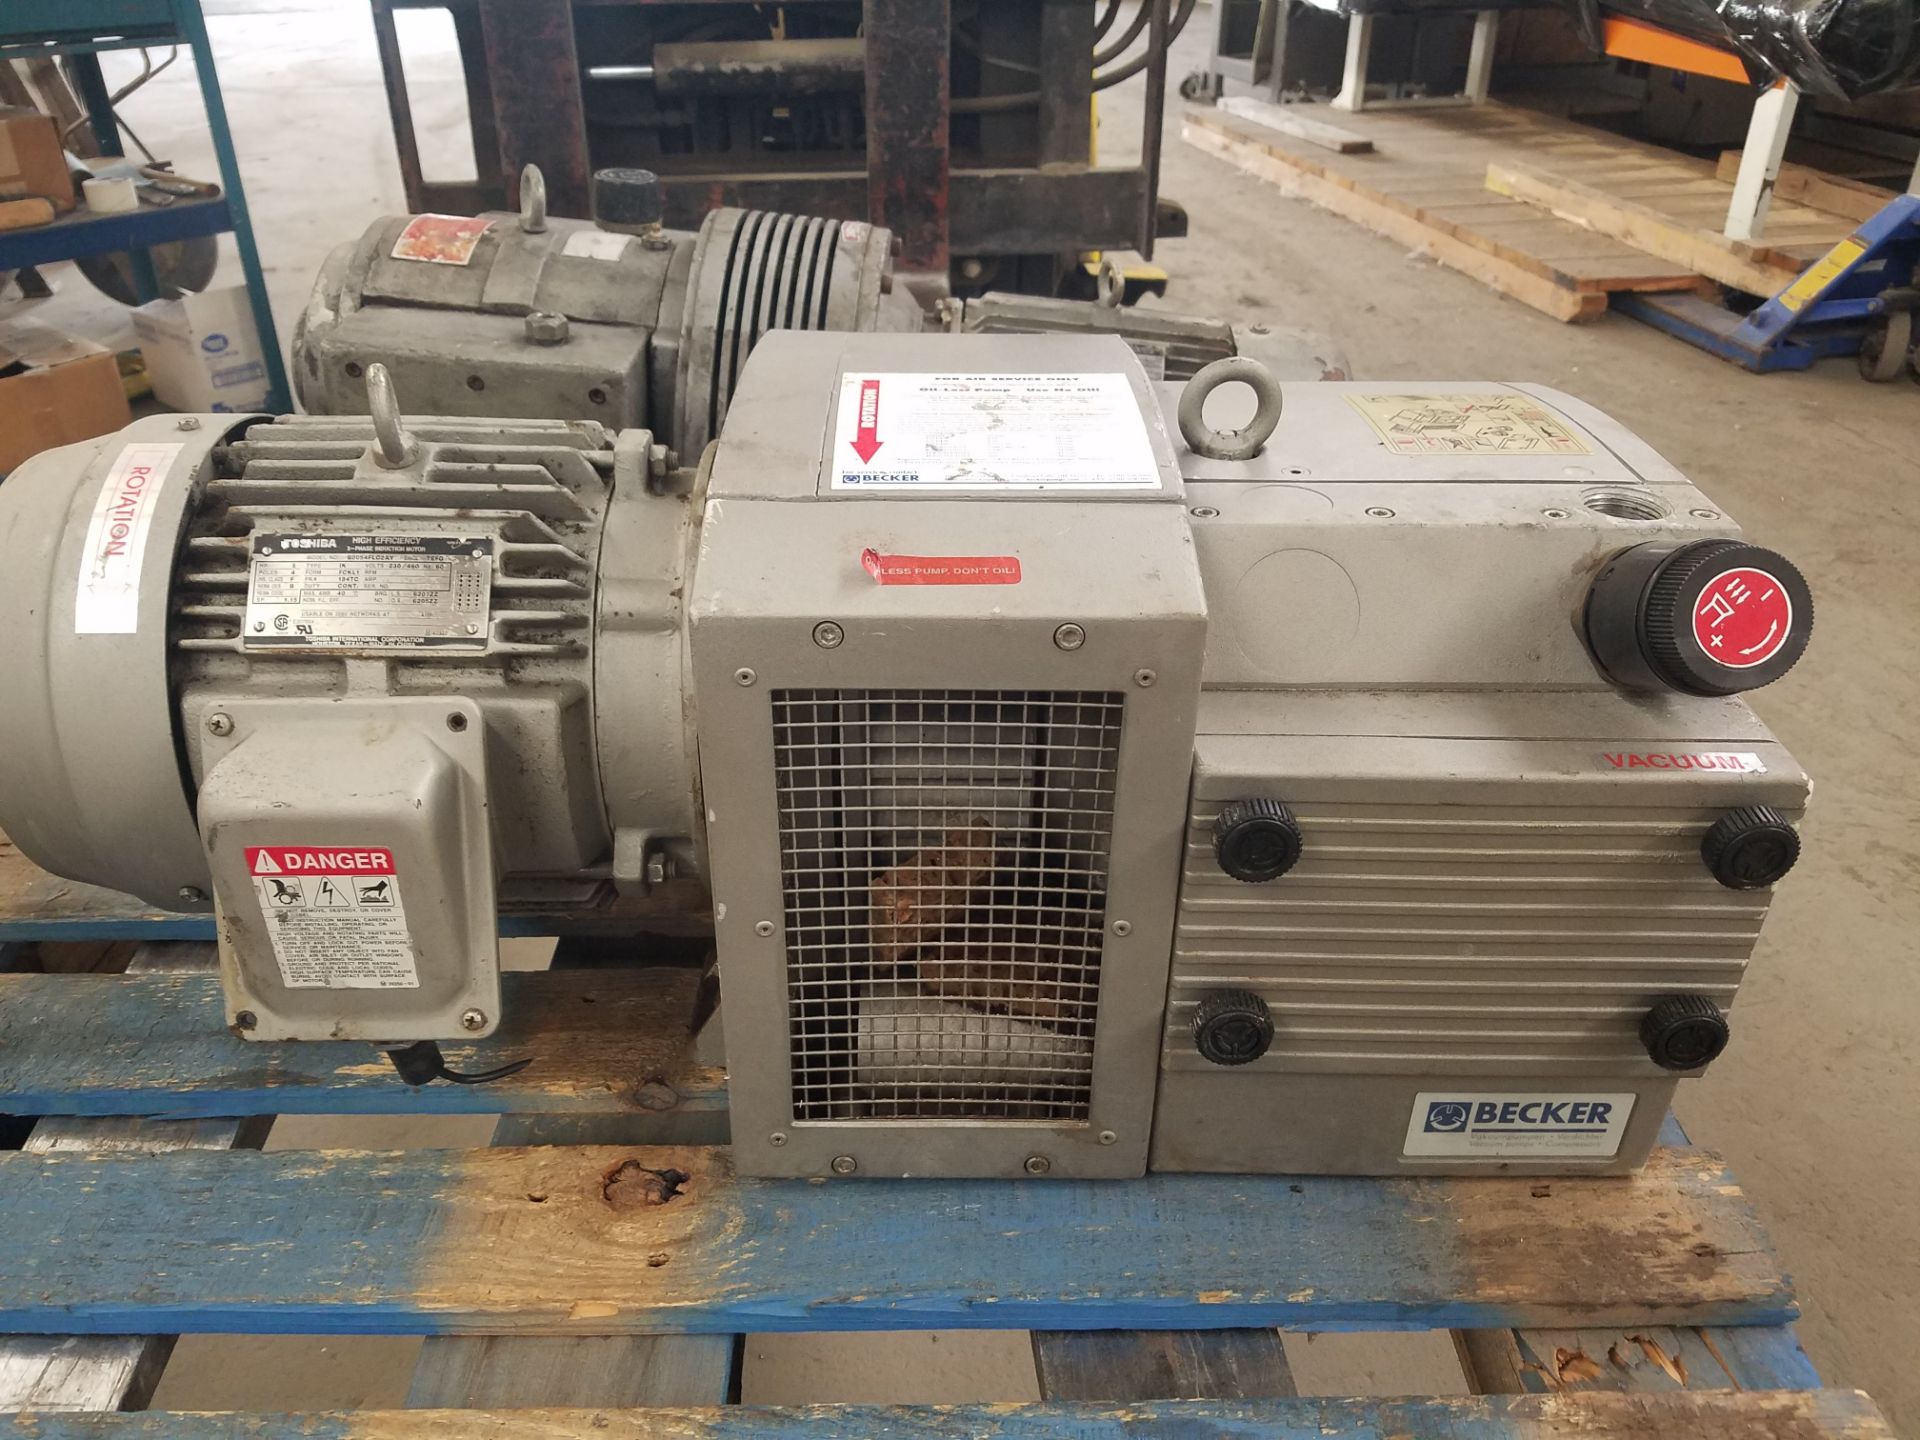 Becker KVT 3.80 Vacuum Pump, 5 hp, Volt 230/360, 3-Phase (Loading Fee $100) (Located Fort Worth, TX